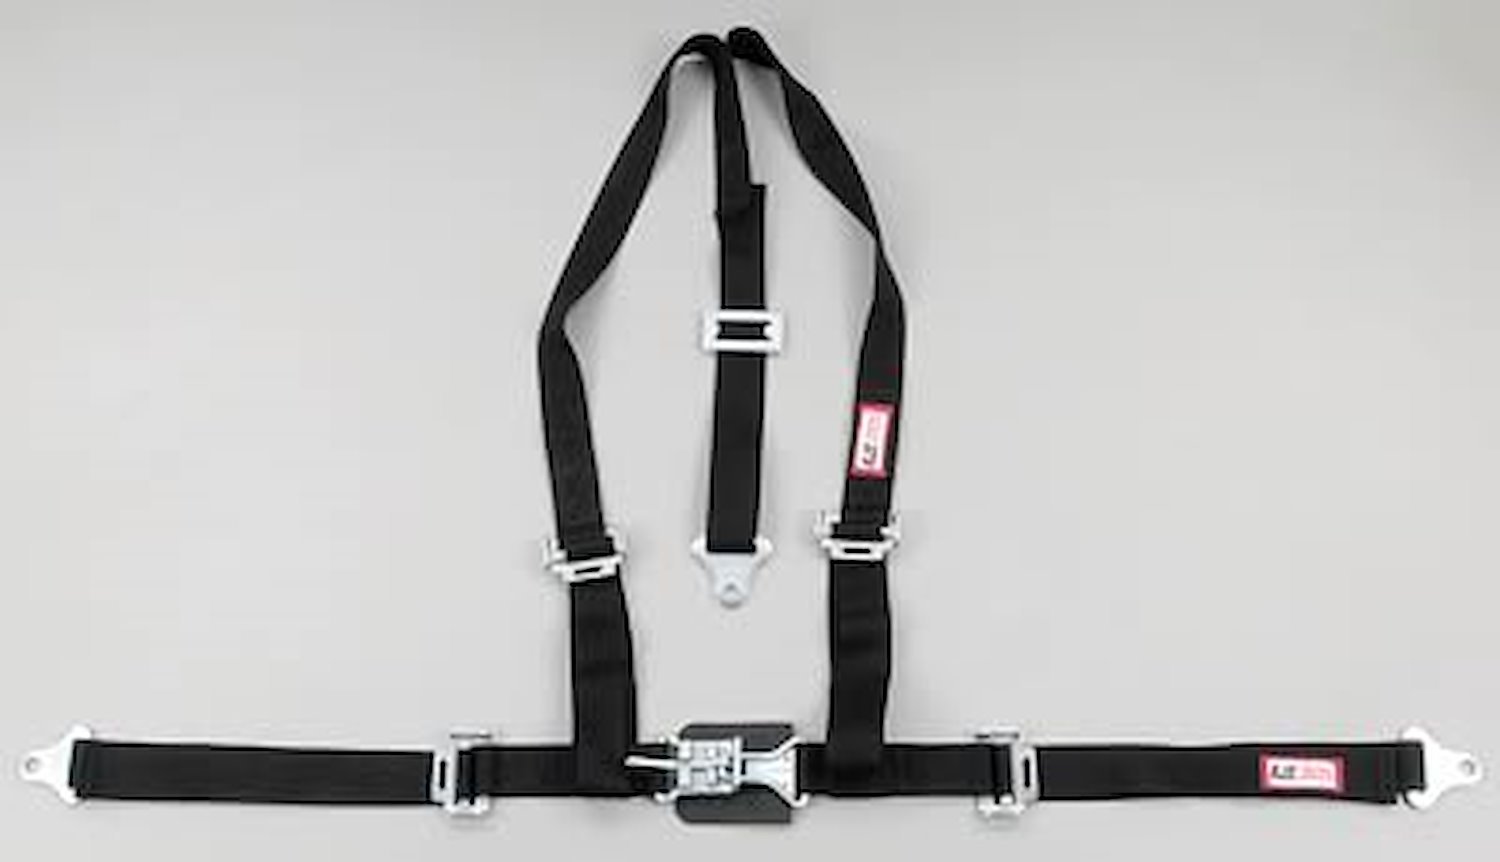 NON-SFI L&L HARNESS 3 PULL DOWN Lap Belt w/adjuster 2 S.H. Individual ROLL BAR Mount ALL WRAP ENDS GRAY